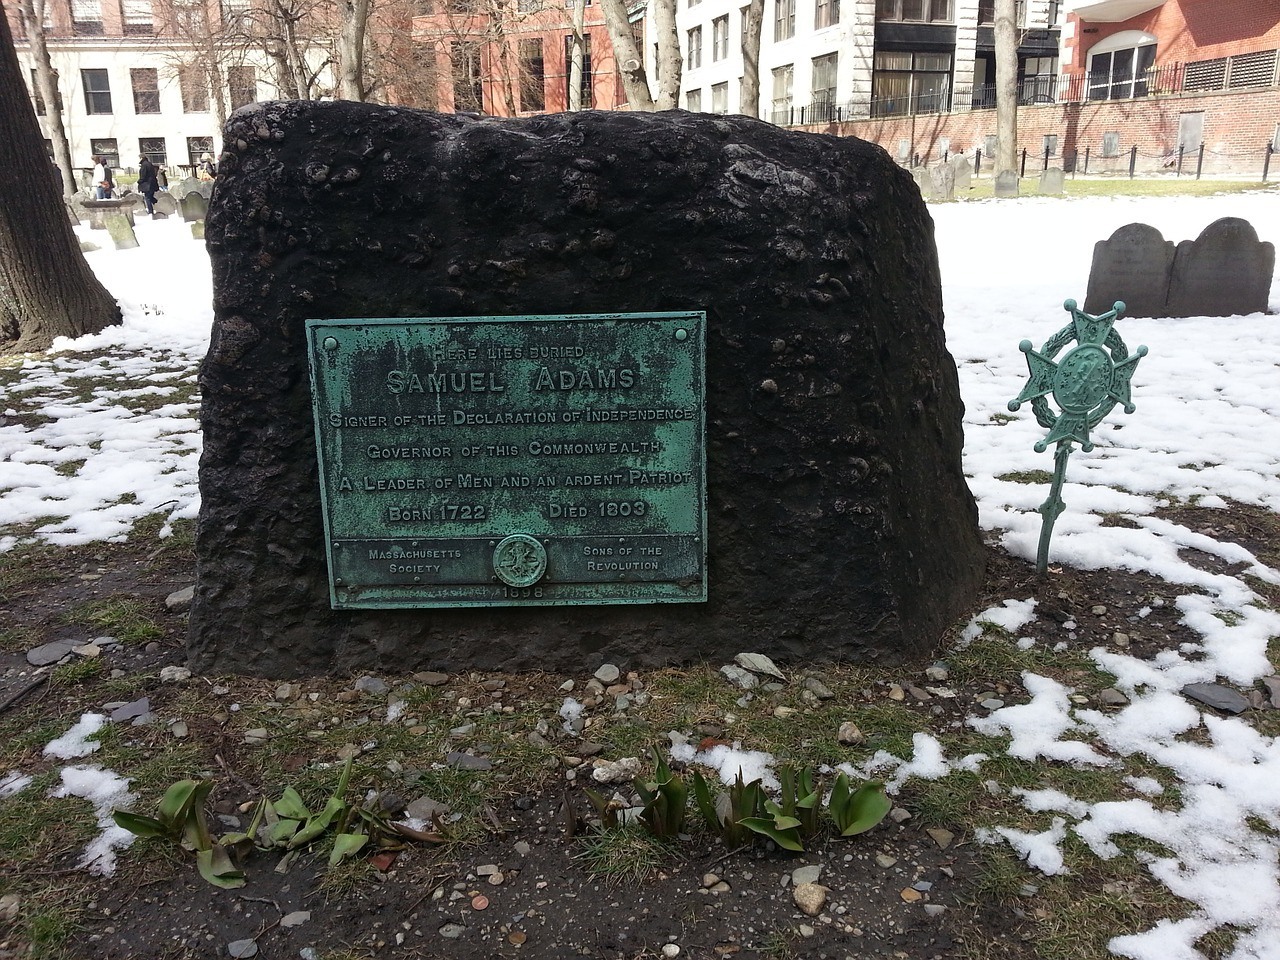 Visit the Gravesites of Famous Americans at Granary Burying Ground